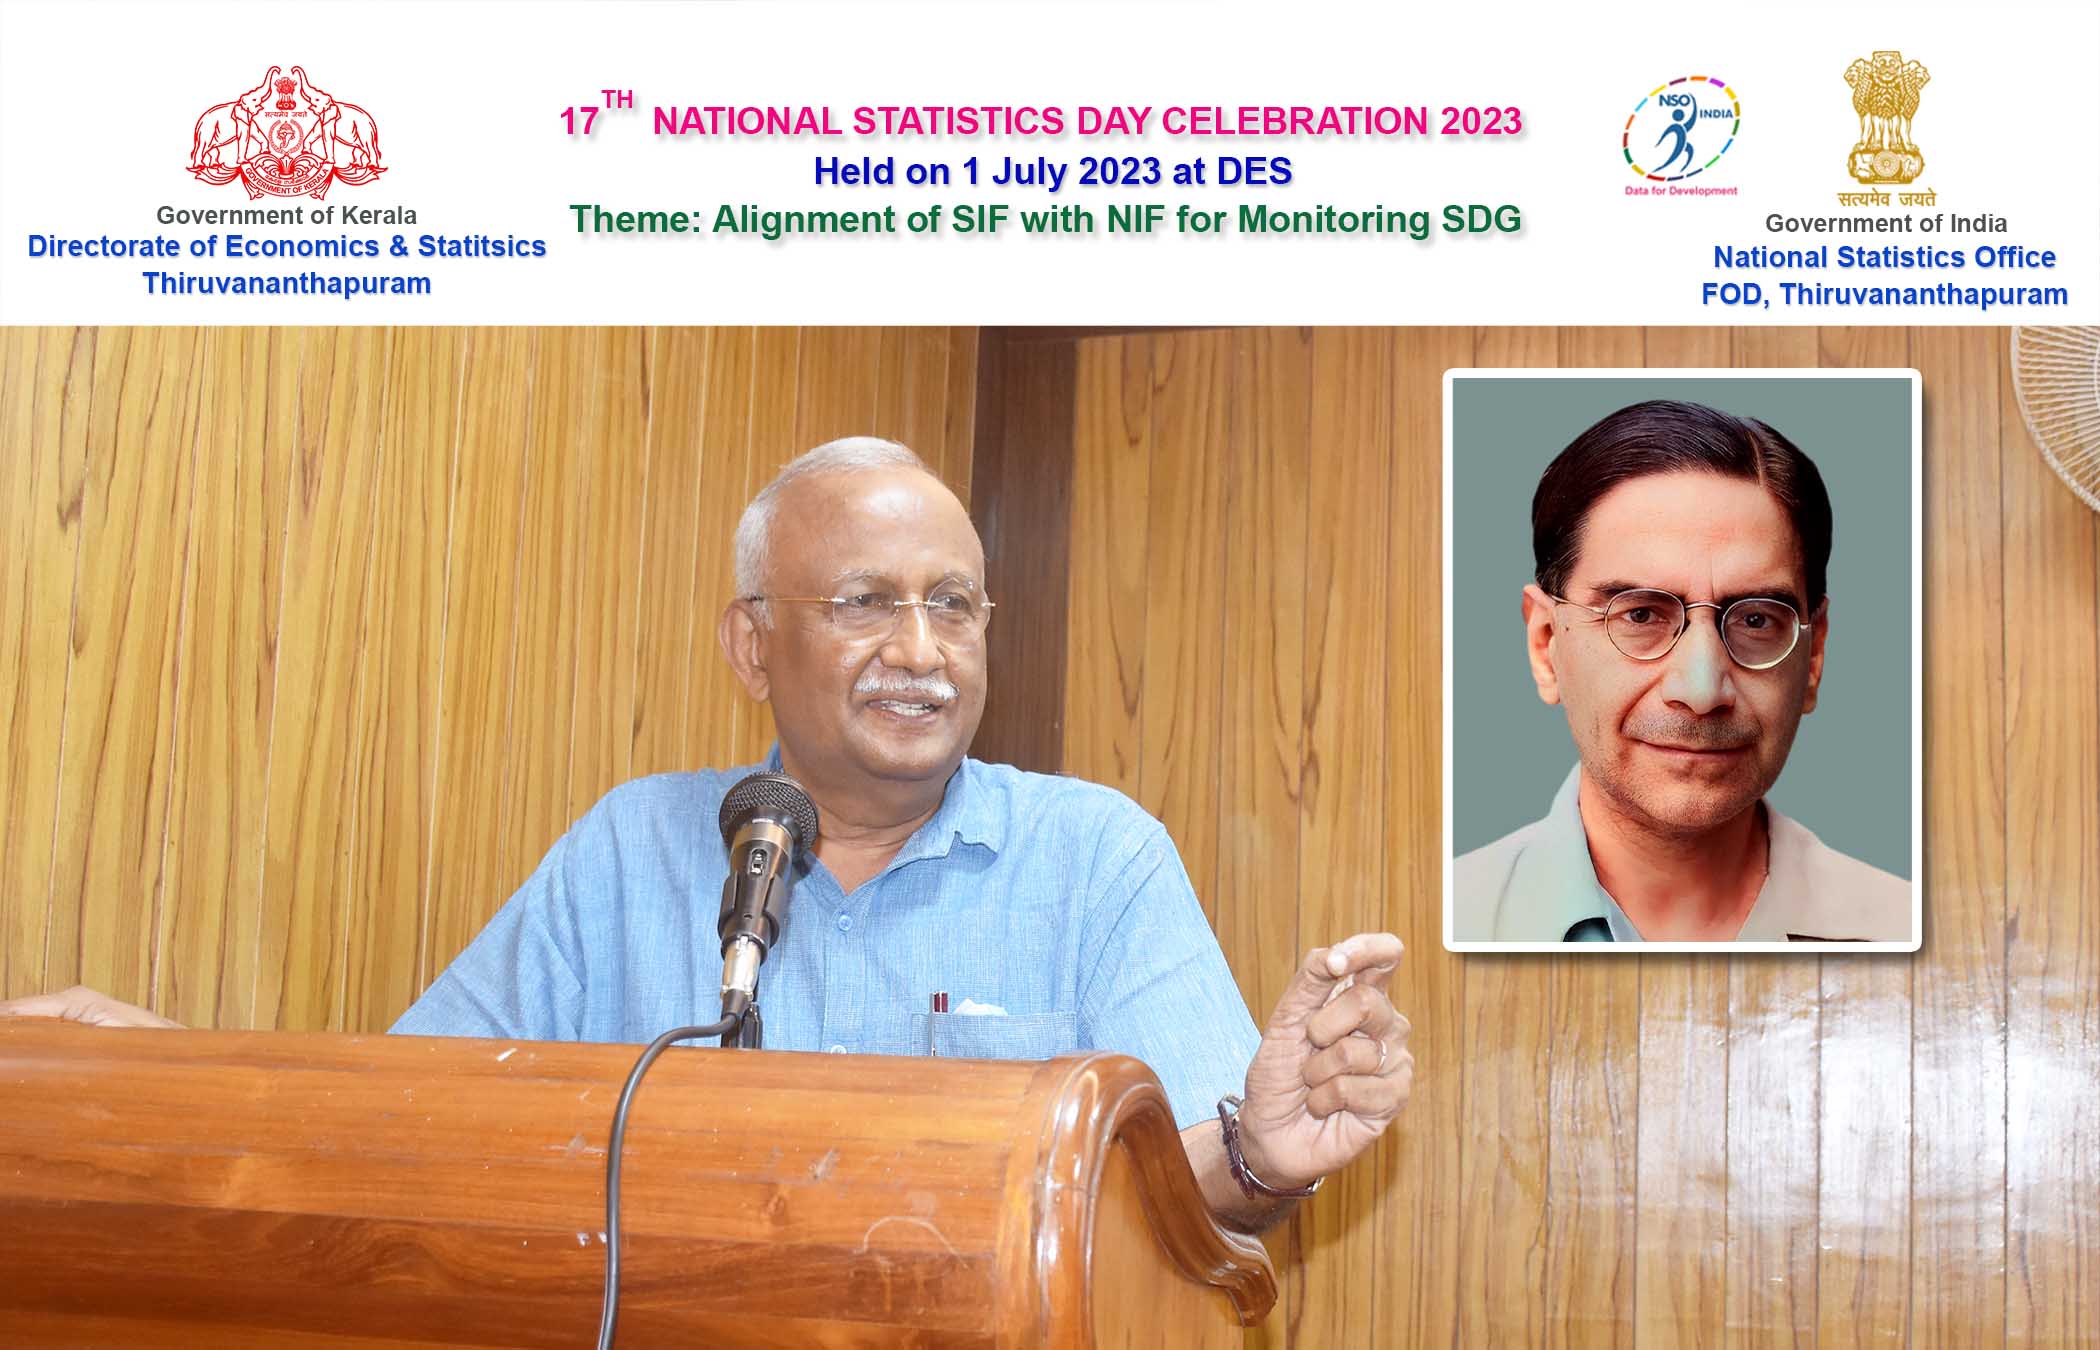 Sri. S.M. Vijayanand Former CS Kerala and Director CMD inaugurated the 17th Statistics Day Celebration in DES on 1-7-2023